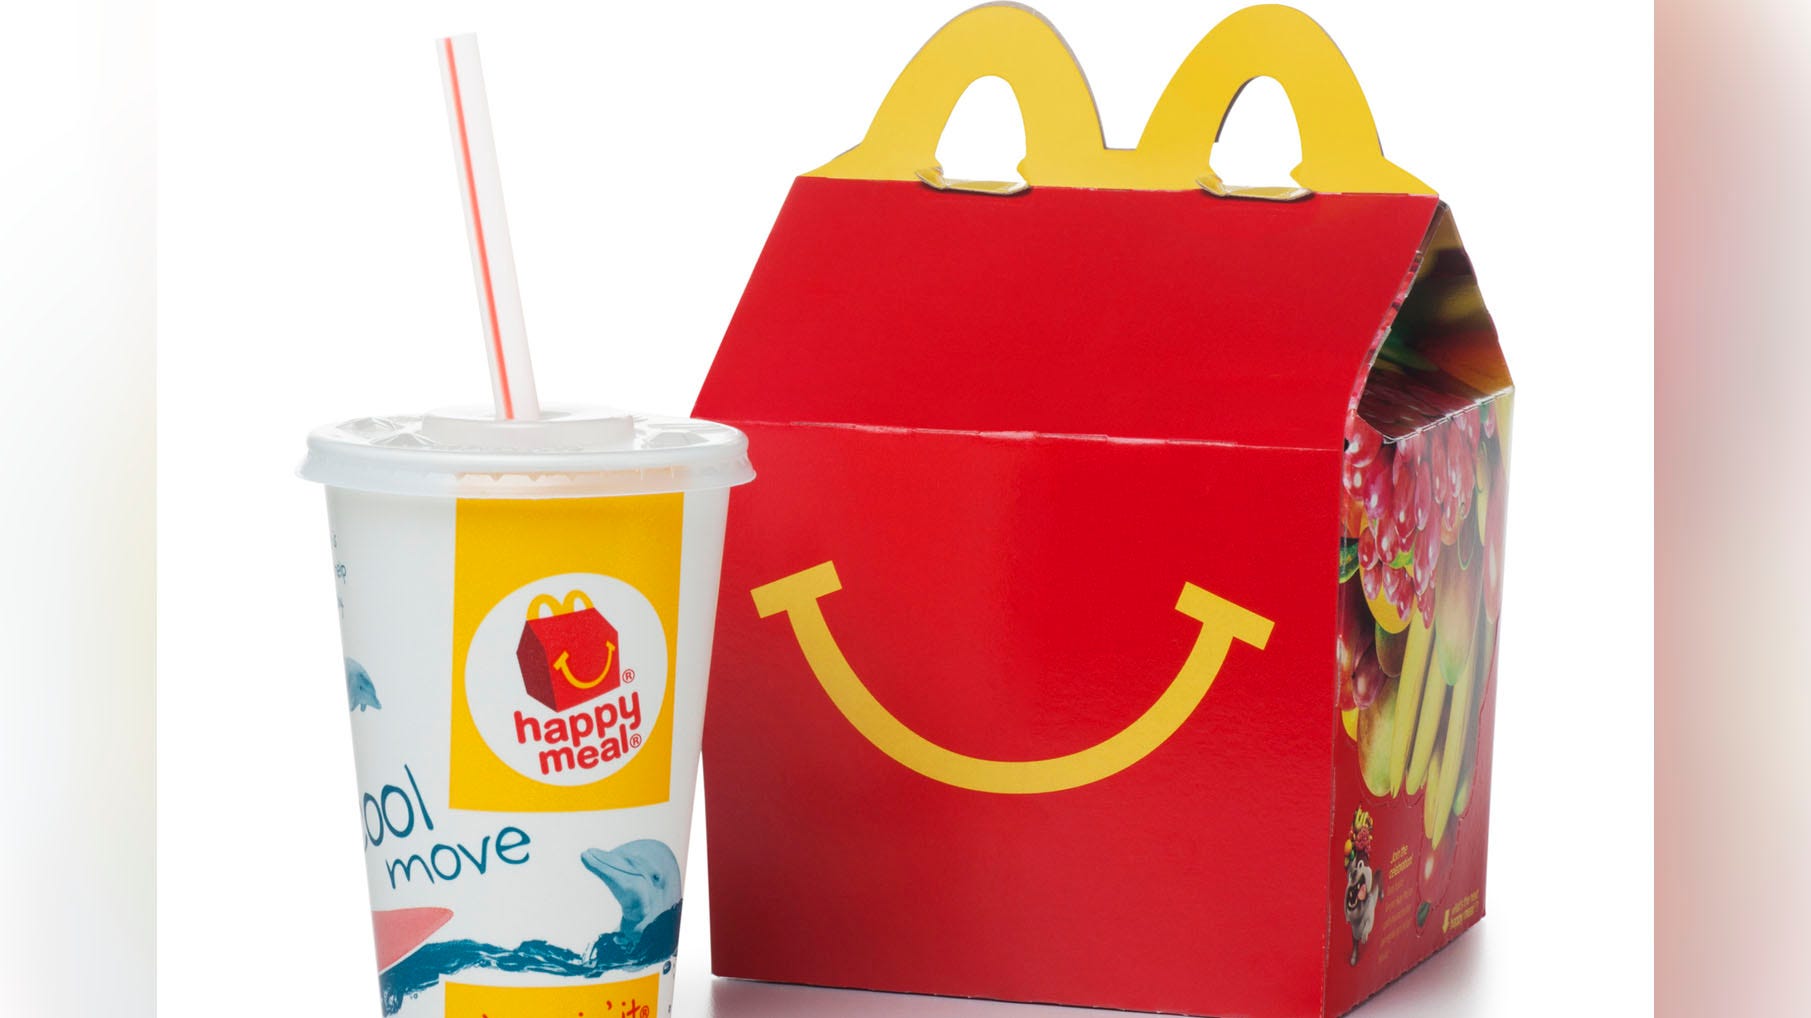 mcdonald-s-releases-happy-meal-box-template-newstower-latest-india-news-and-live-updates-on